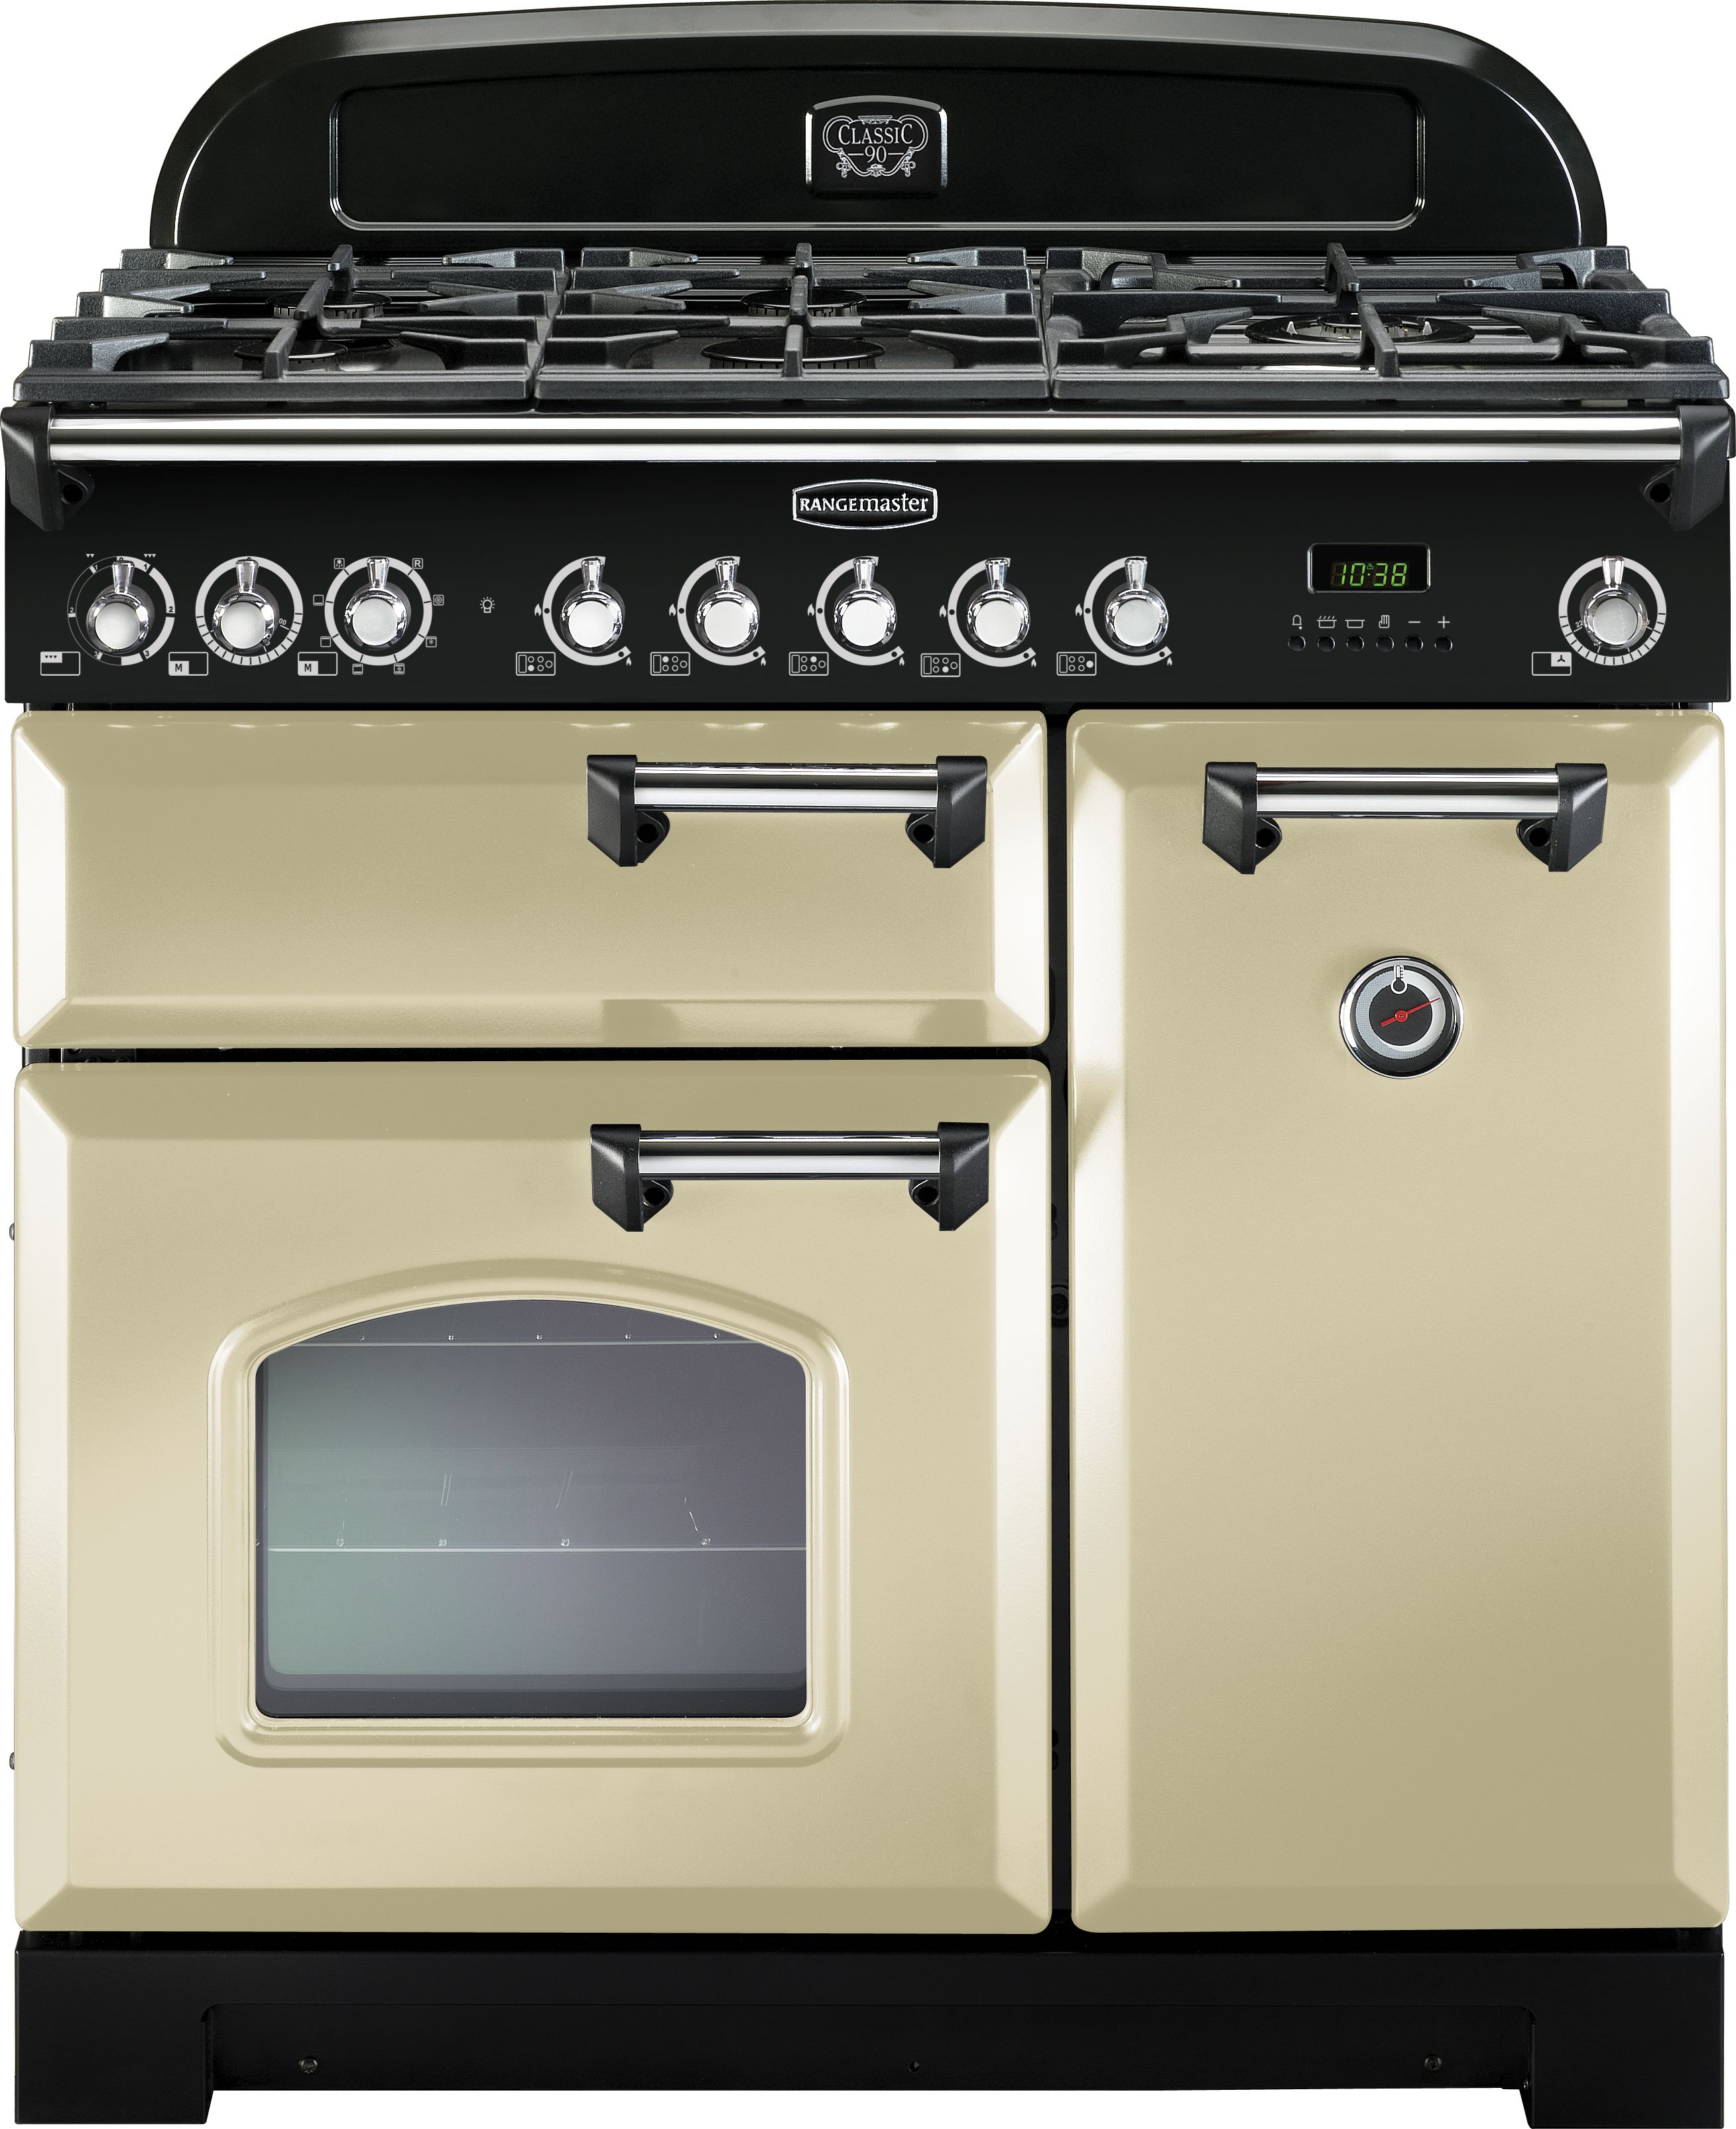 Rangemaster Classic Deluxe CDL90DFFCR/C 90cm Dual Fuel Range Cooker - Cream / Chrome - A/A Rated, Cream